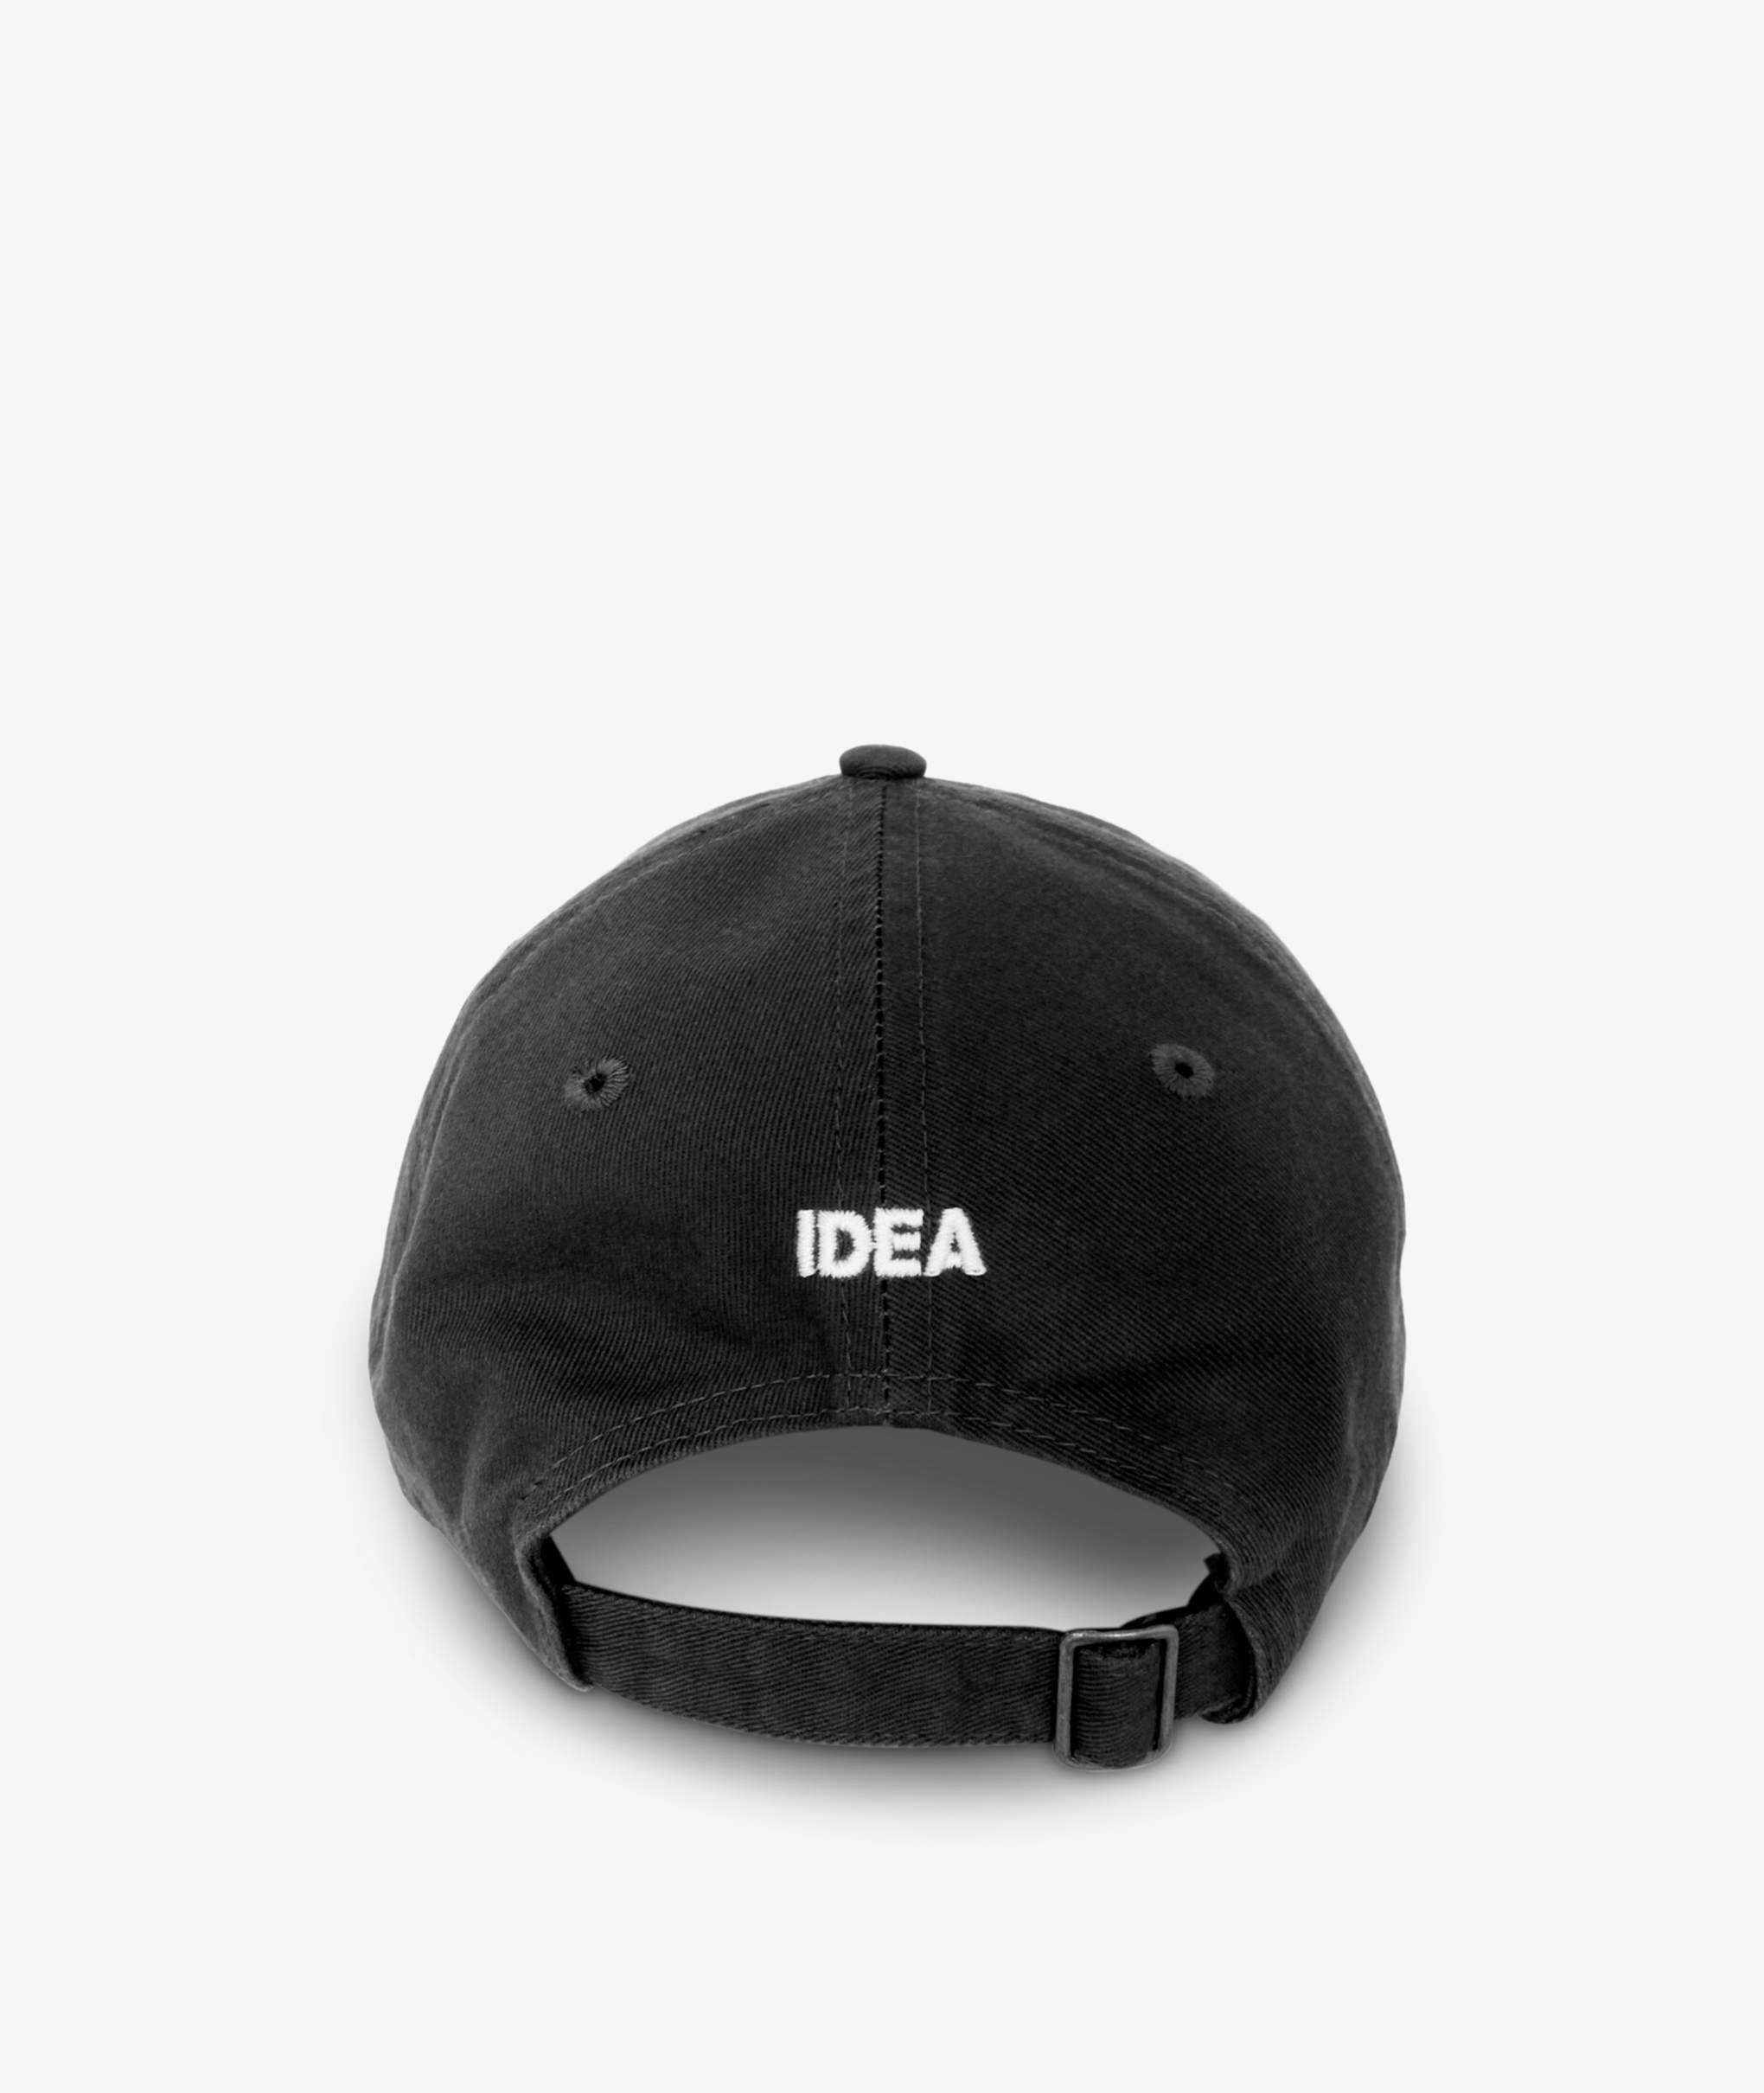 Norse Store | Shipping Worldwide - IDEA One Night Only Hat - Black